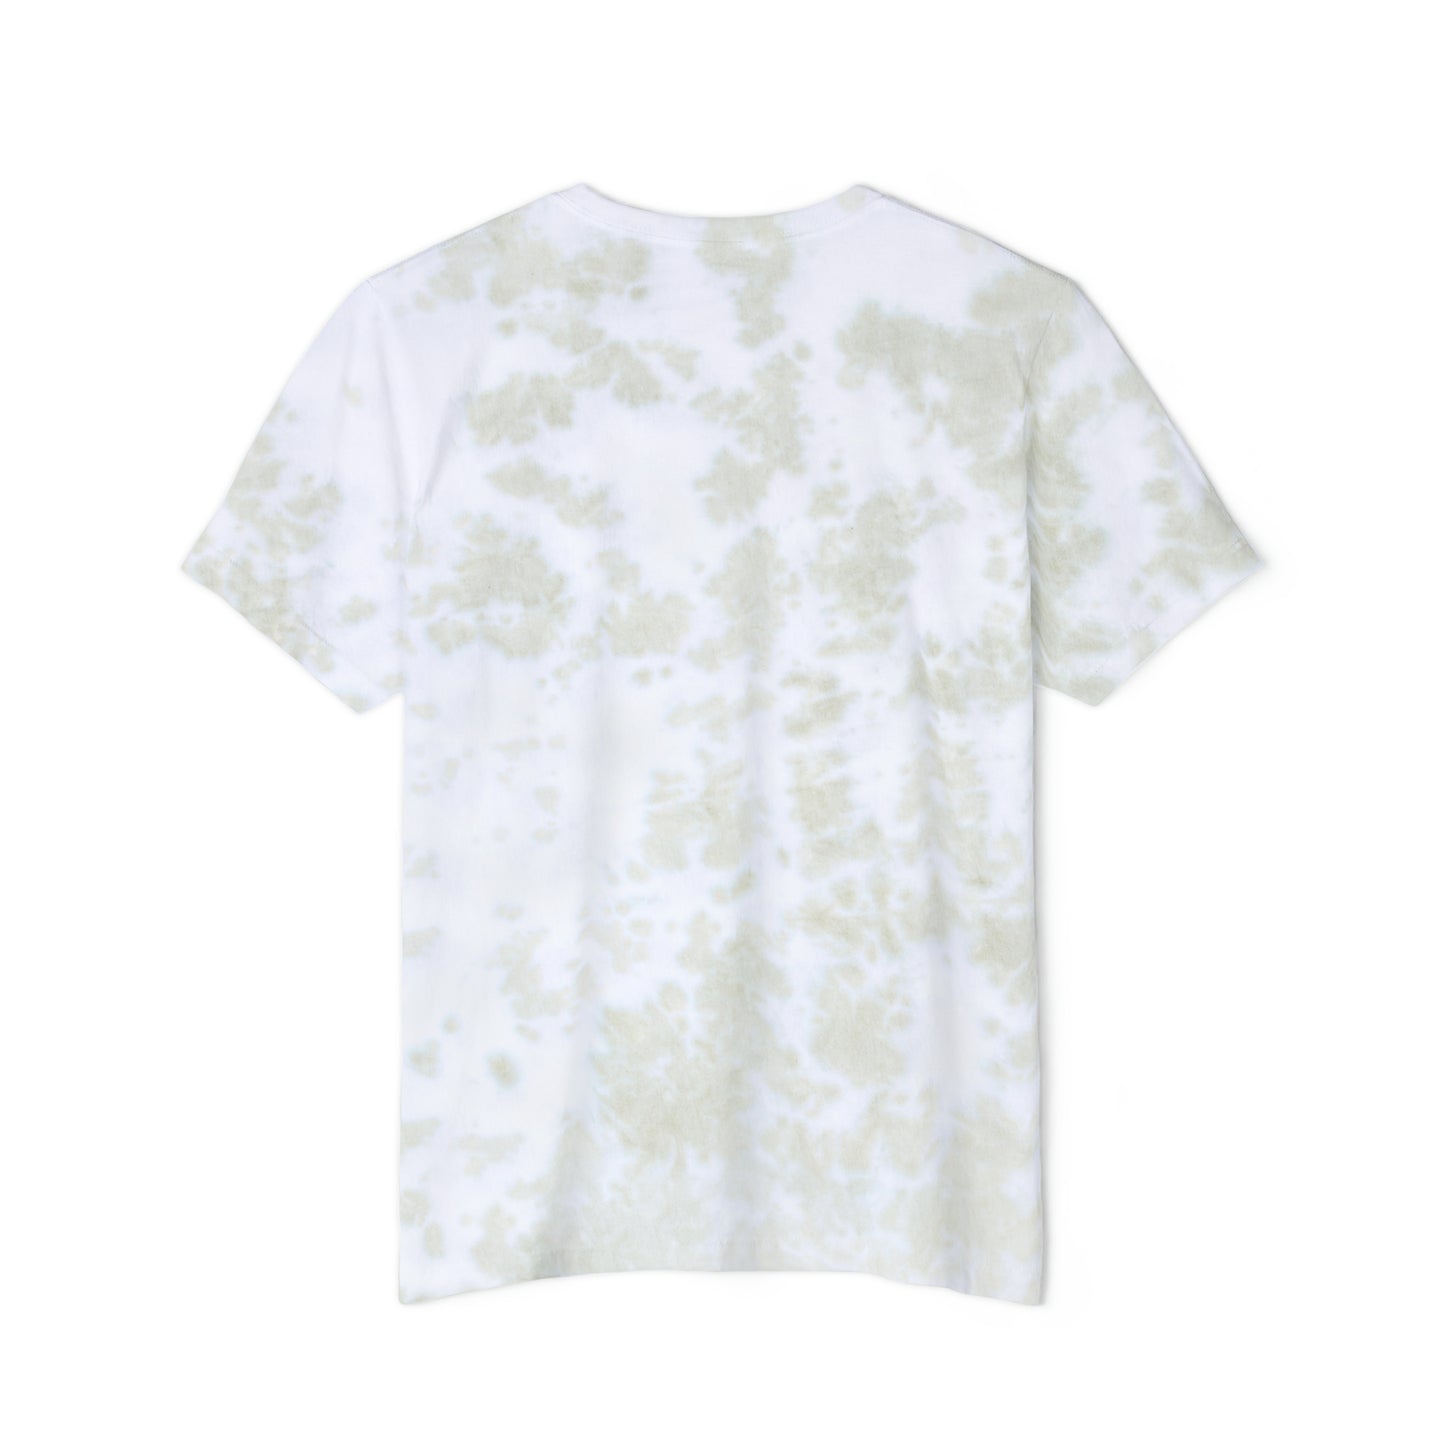 The Cana House Tie-Dyed T-Shirt